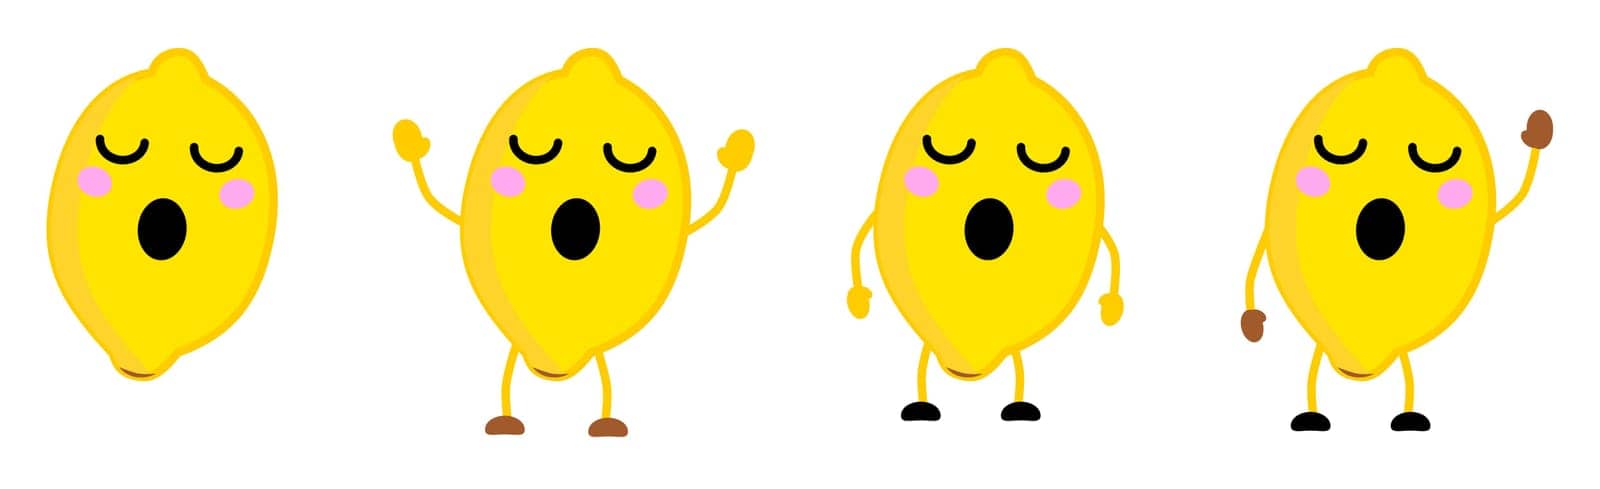 Cute kawaii style lemon fruit, eyes closed, mouth opened. Version with hands raised, down and waving. by Ivanko